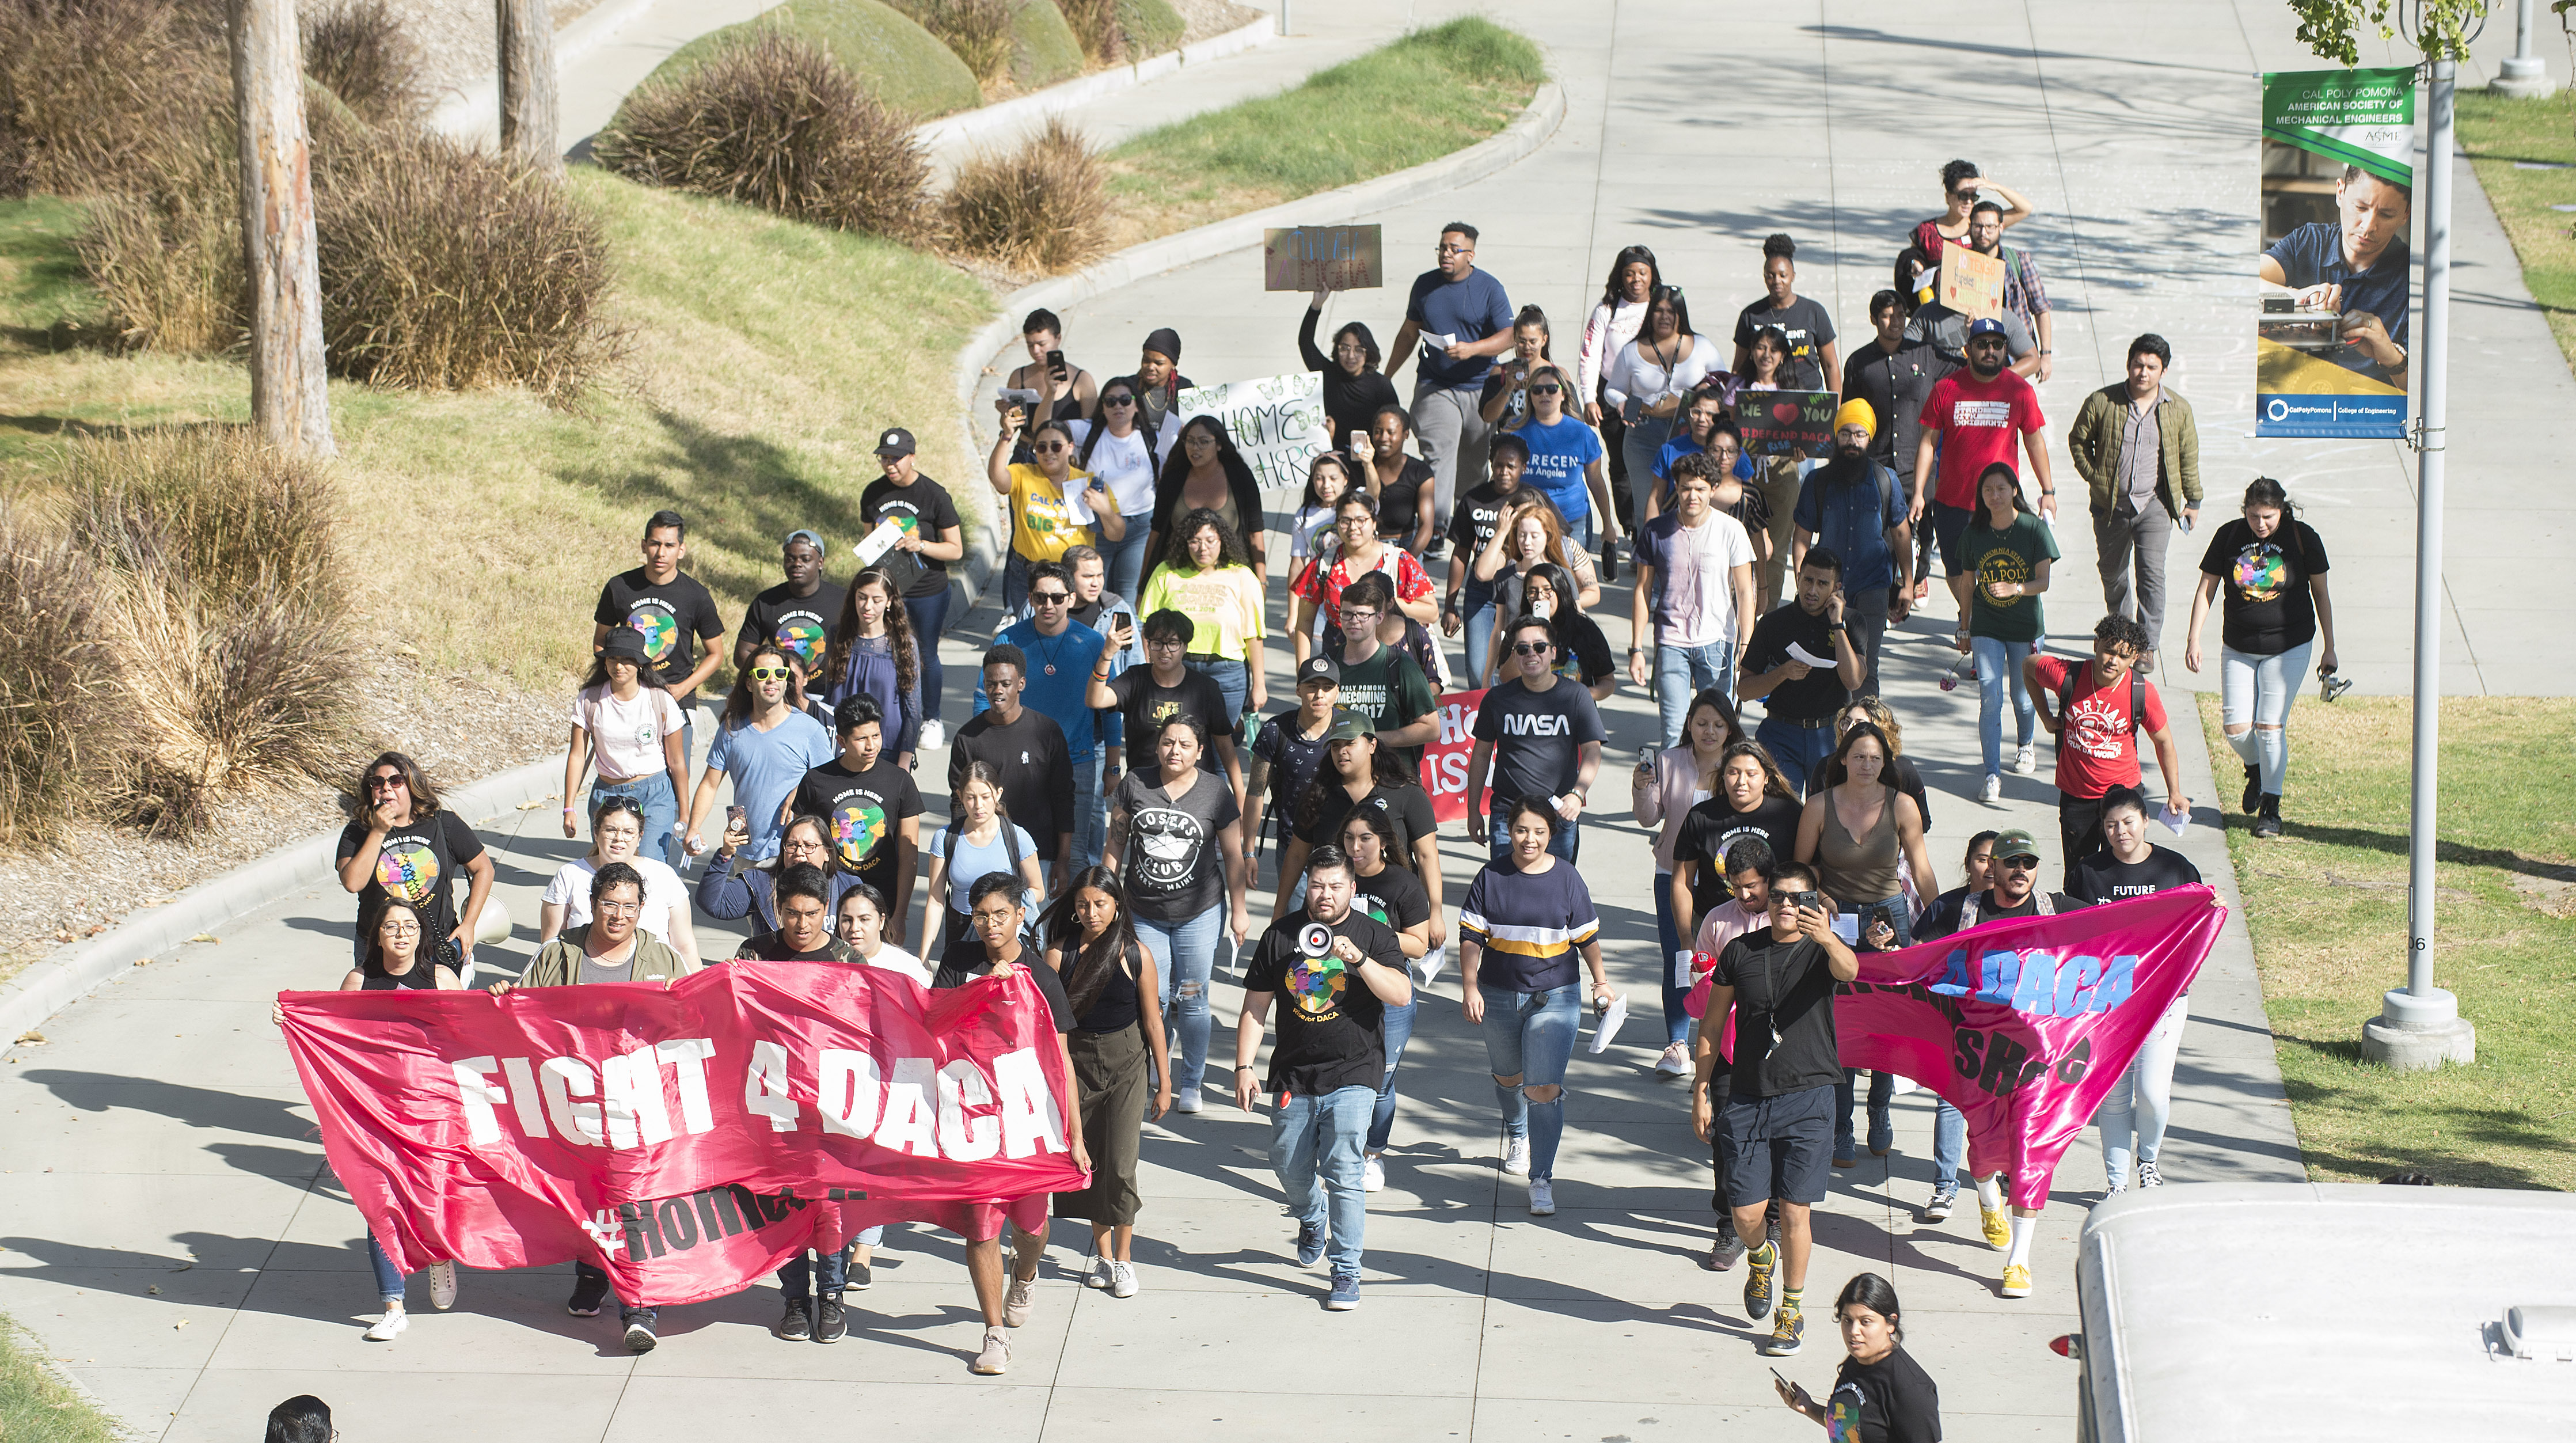 Students march at CPP in support of DACA